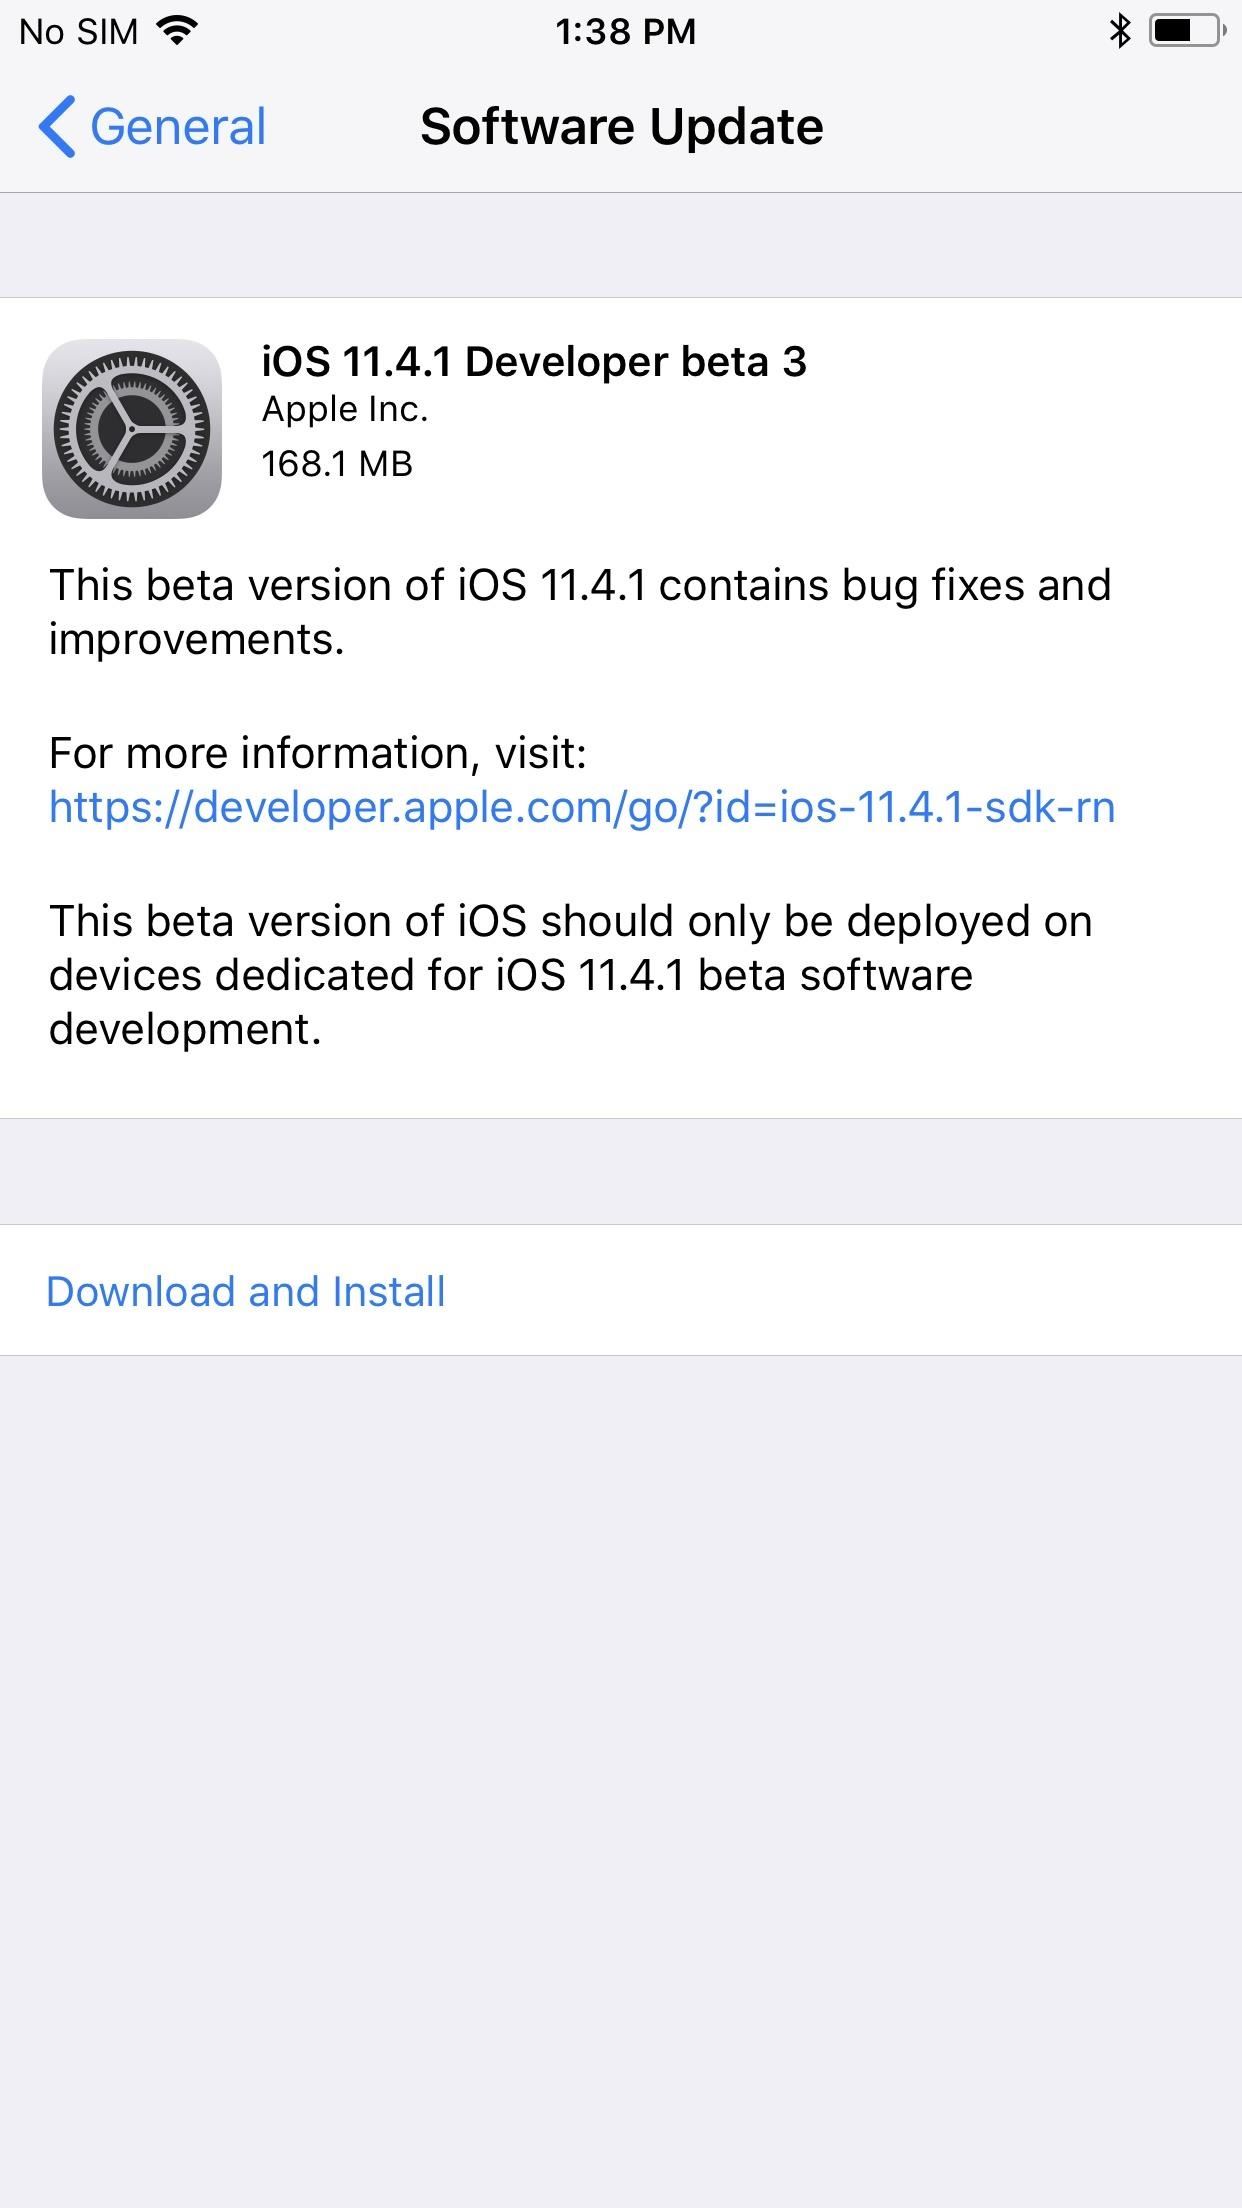 iOS 11.4.1 Beta 3 Released for iPhones, Still Focusing on Unknown Improvements